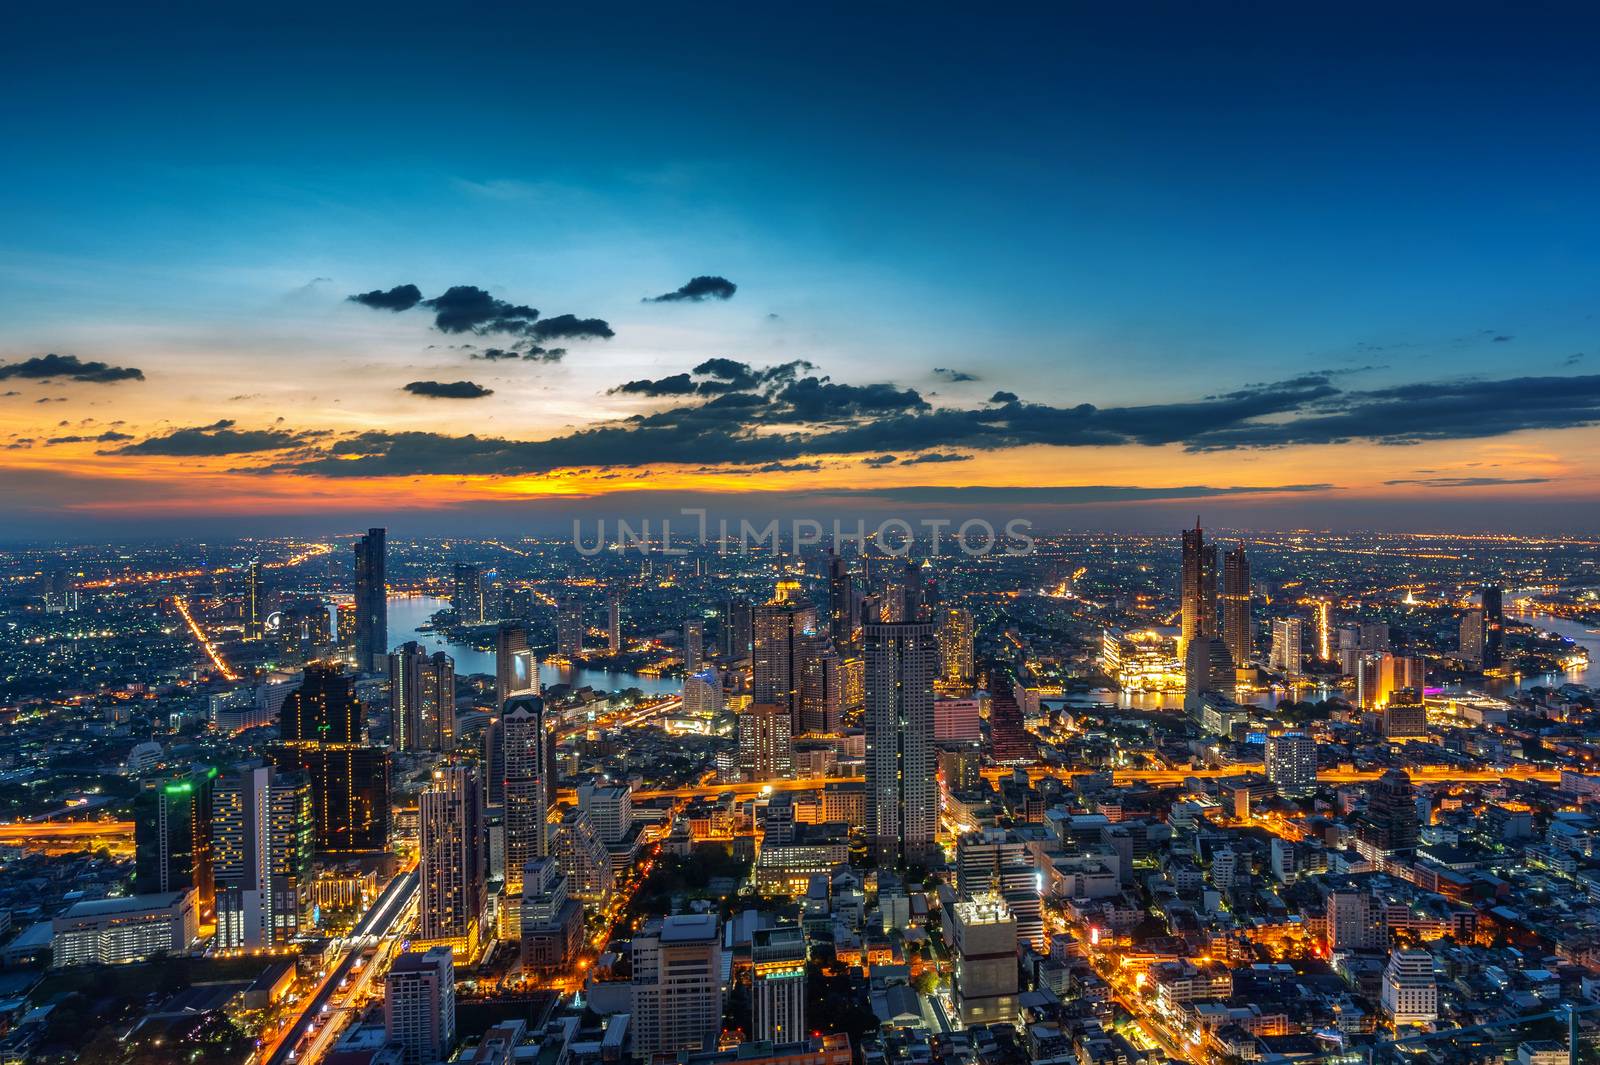 Aerial view of Bangkok cityscape, Thailand by gutarphotoghaphy